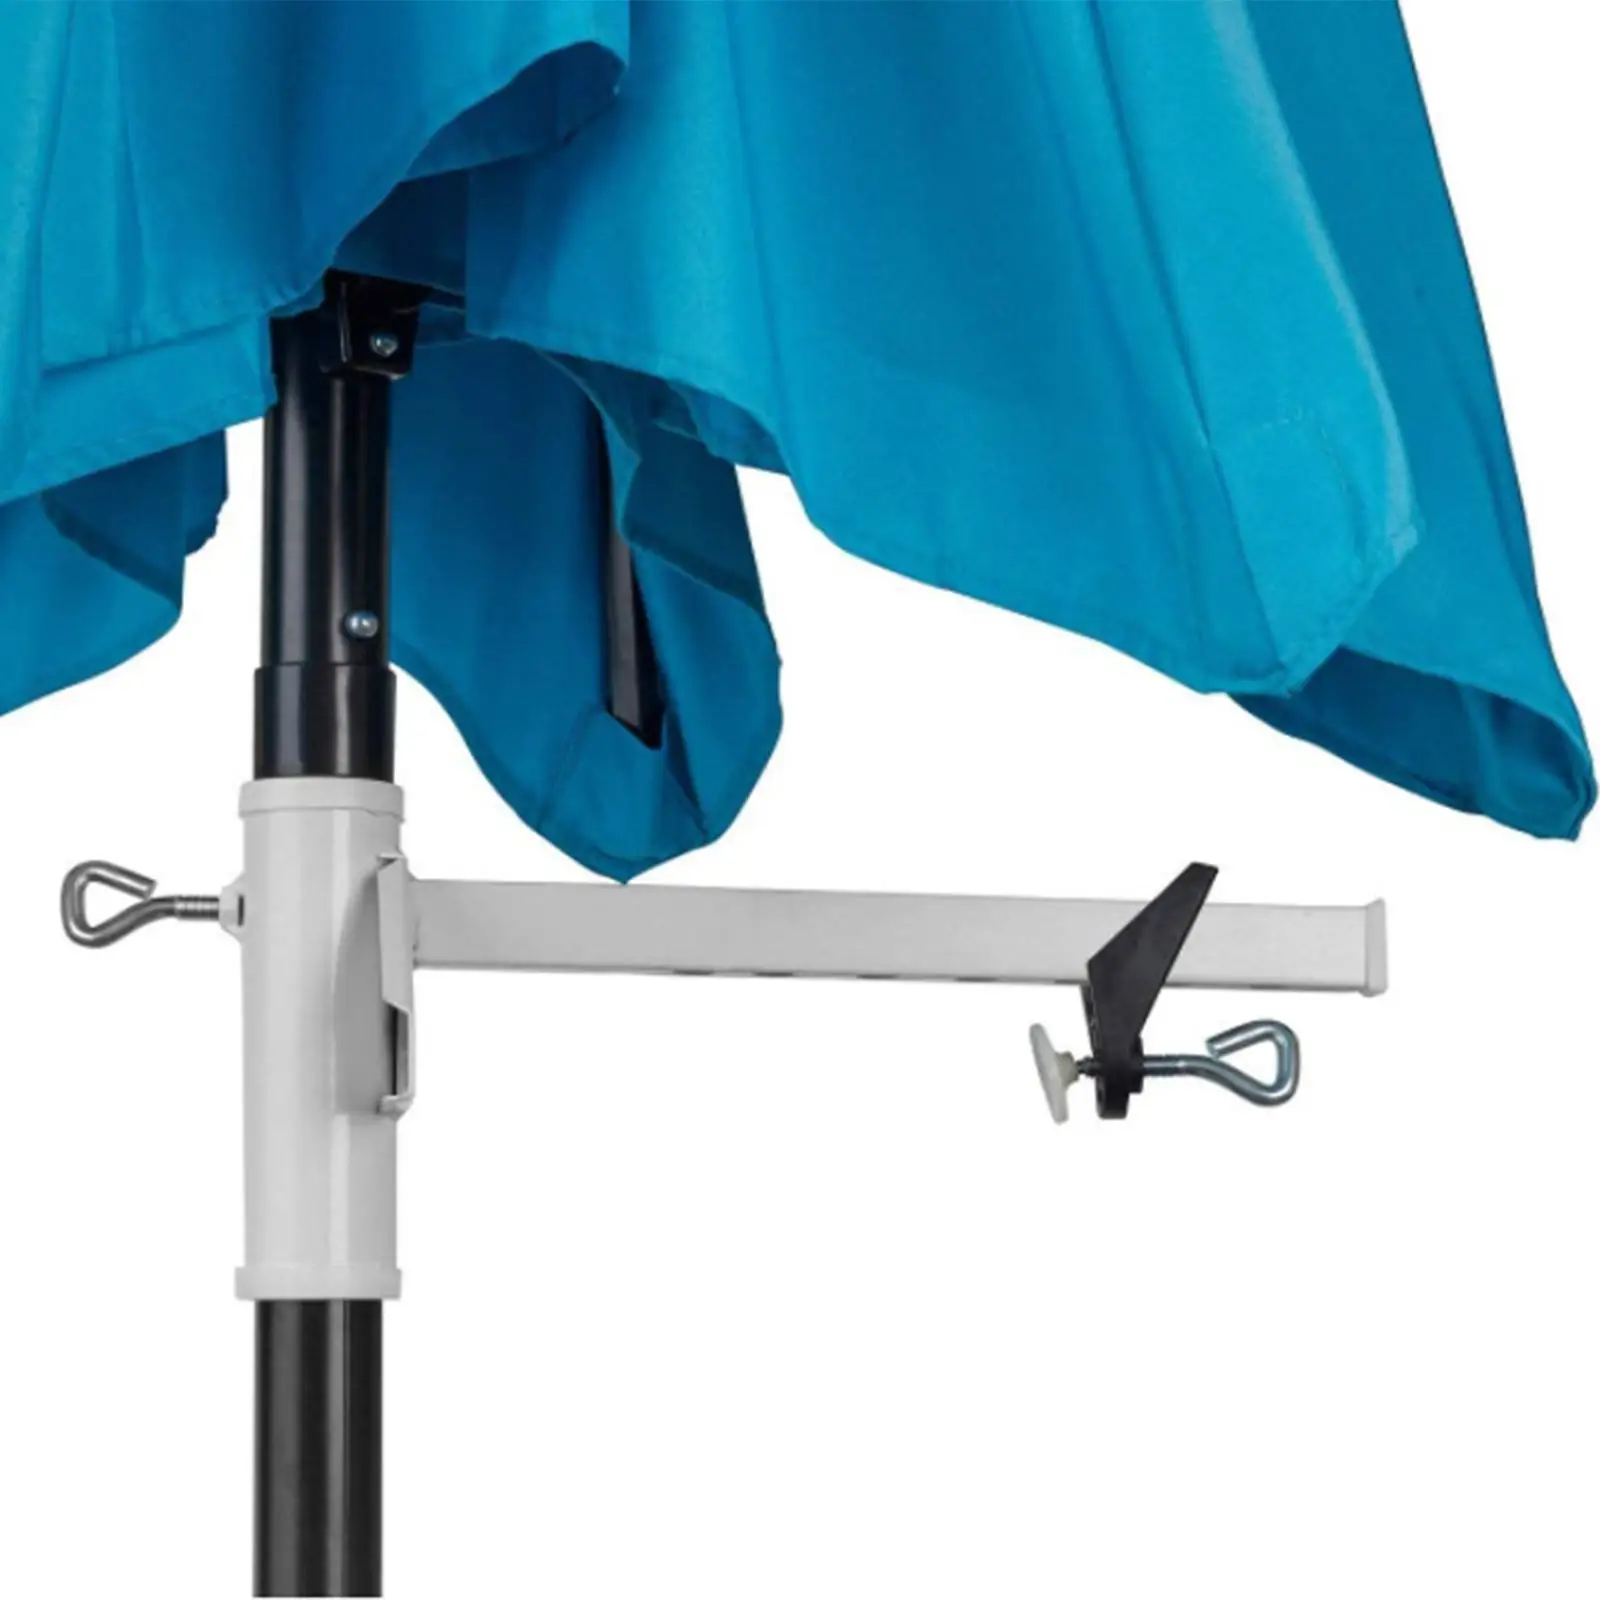 Parasol Holder Umbrella Clamp Adjustable Heavy Duty Mounting Bracket Fixed Clip for Pool Deck Railing Yard Balcony Outdoor Fence